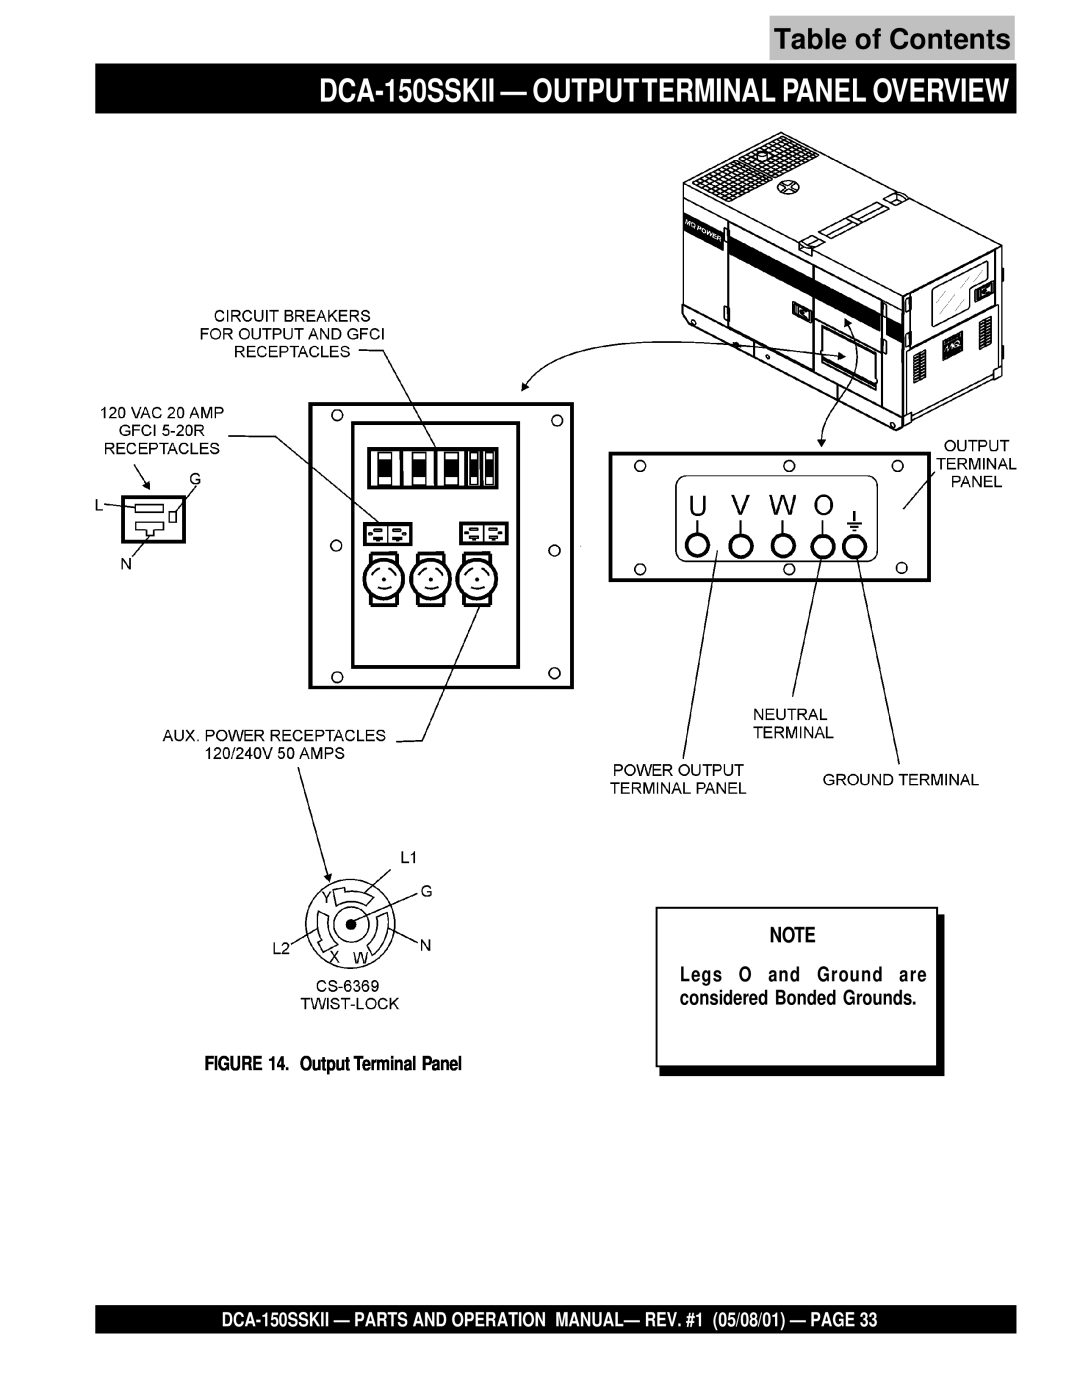 Multiquip operation manual DCA-150SSKII - OUTPUTTERMINAL PANEL OVERVIEW, Table of Contents, Output Terminal Panel 